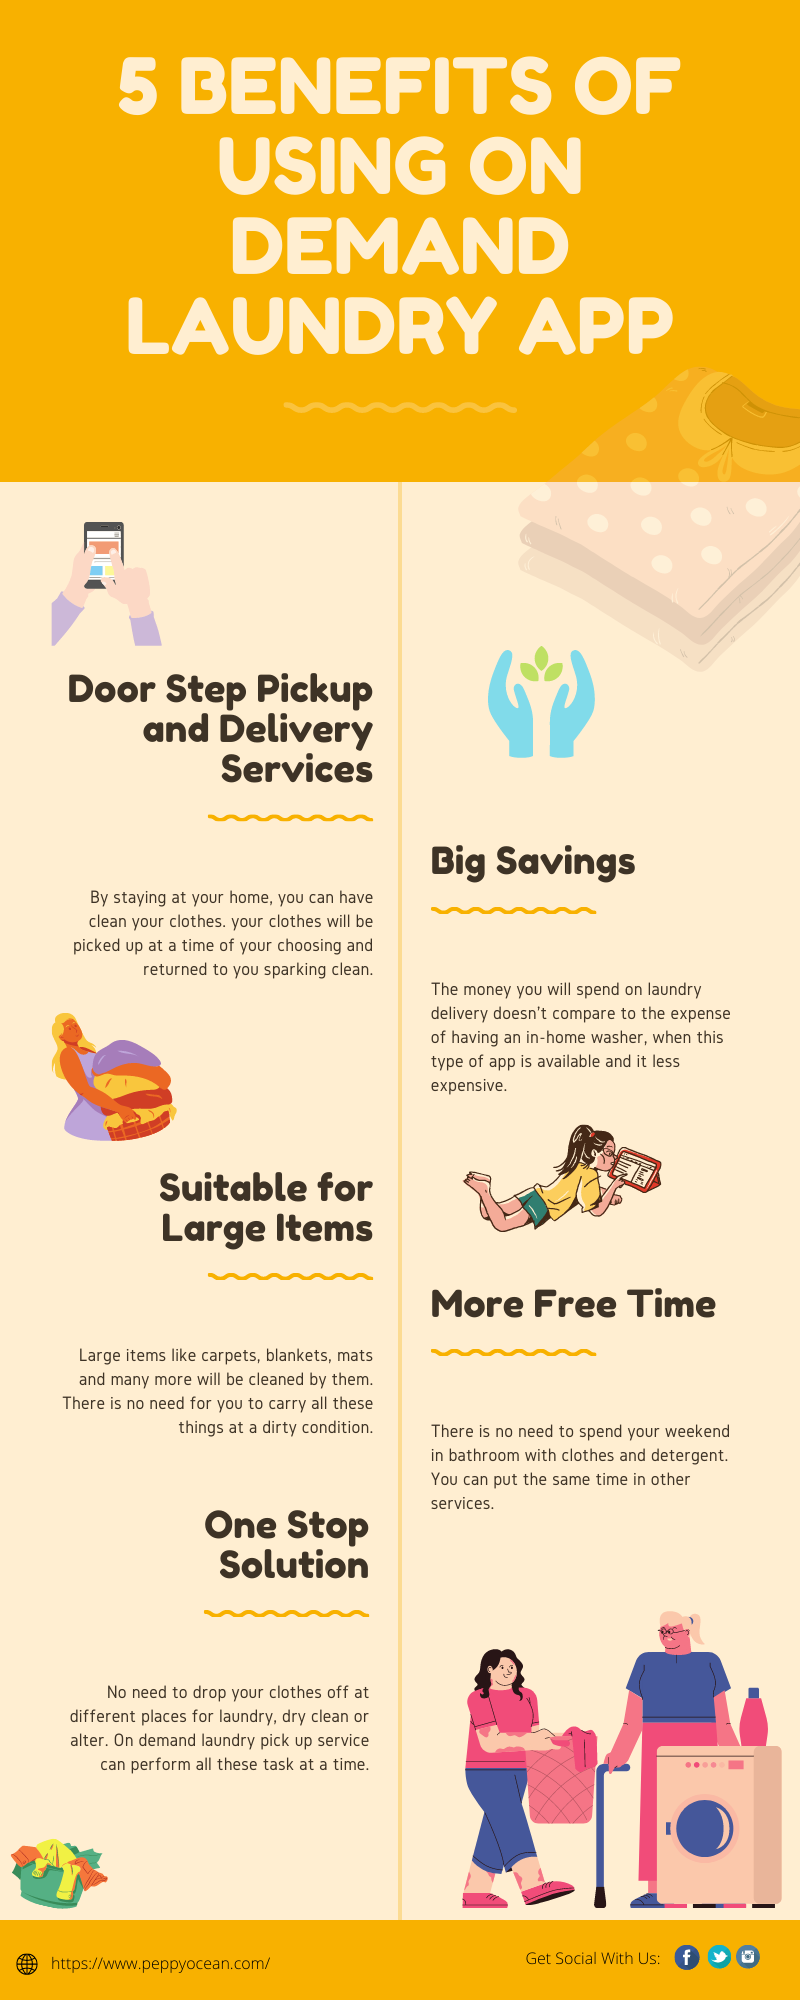 5 benefits of using on demand laundry app #infographic